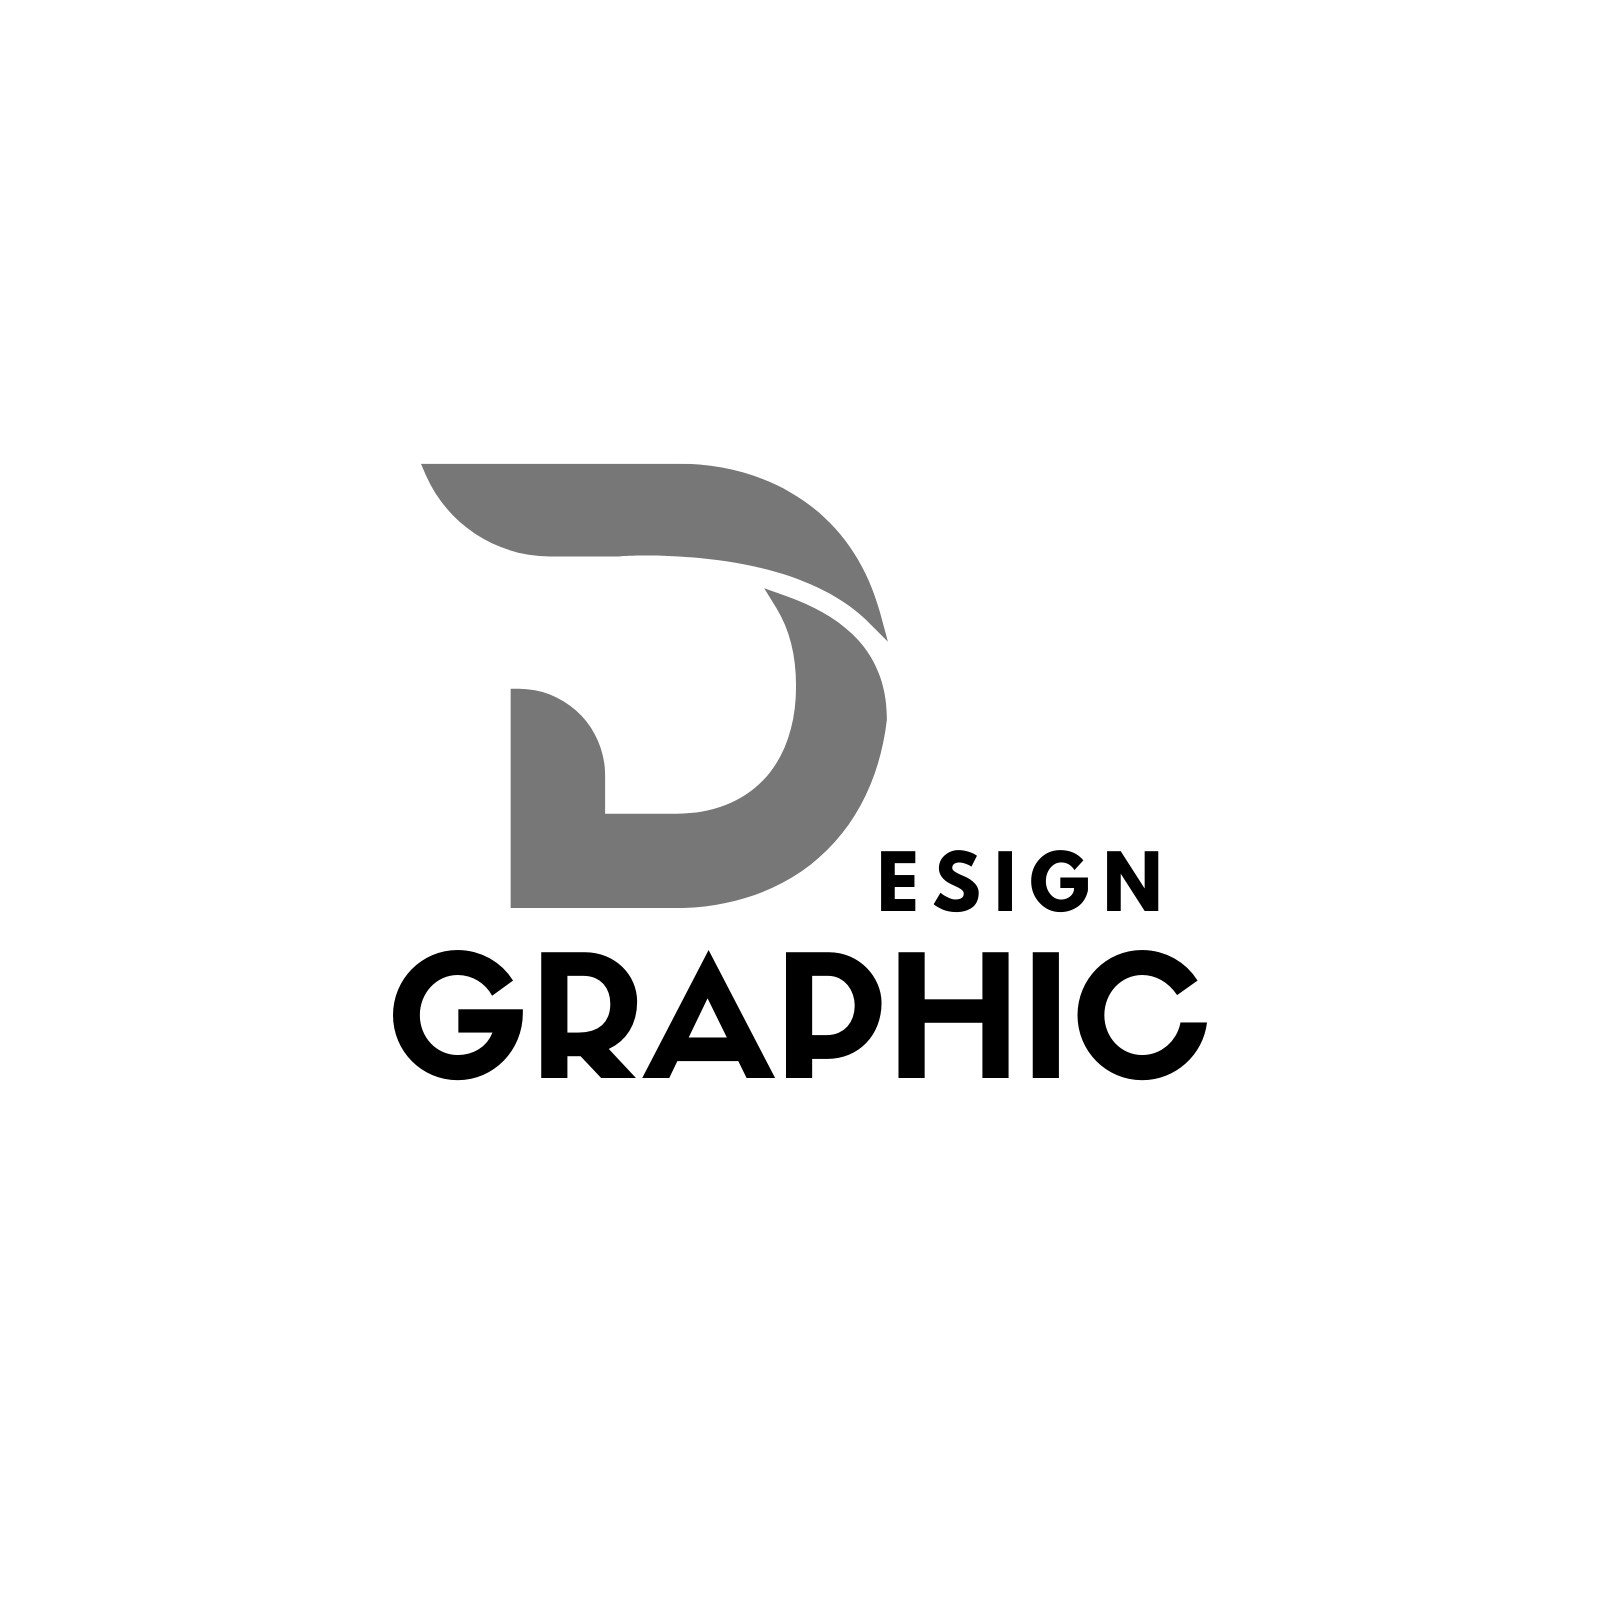 Free and customizable graphic design templates